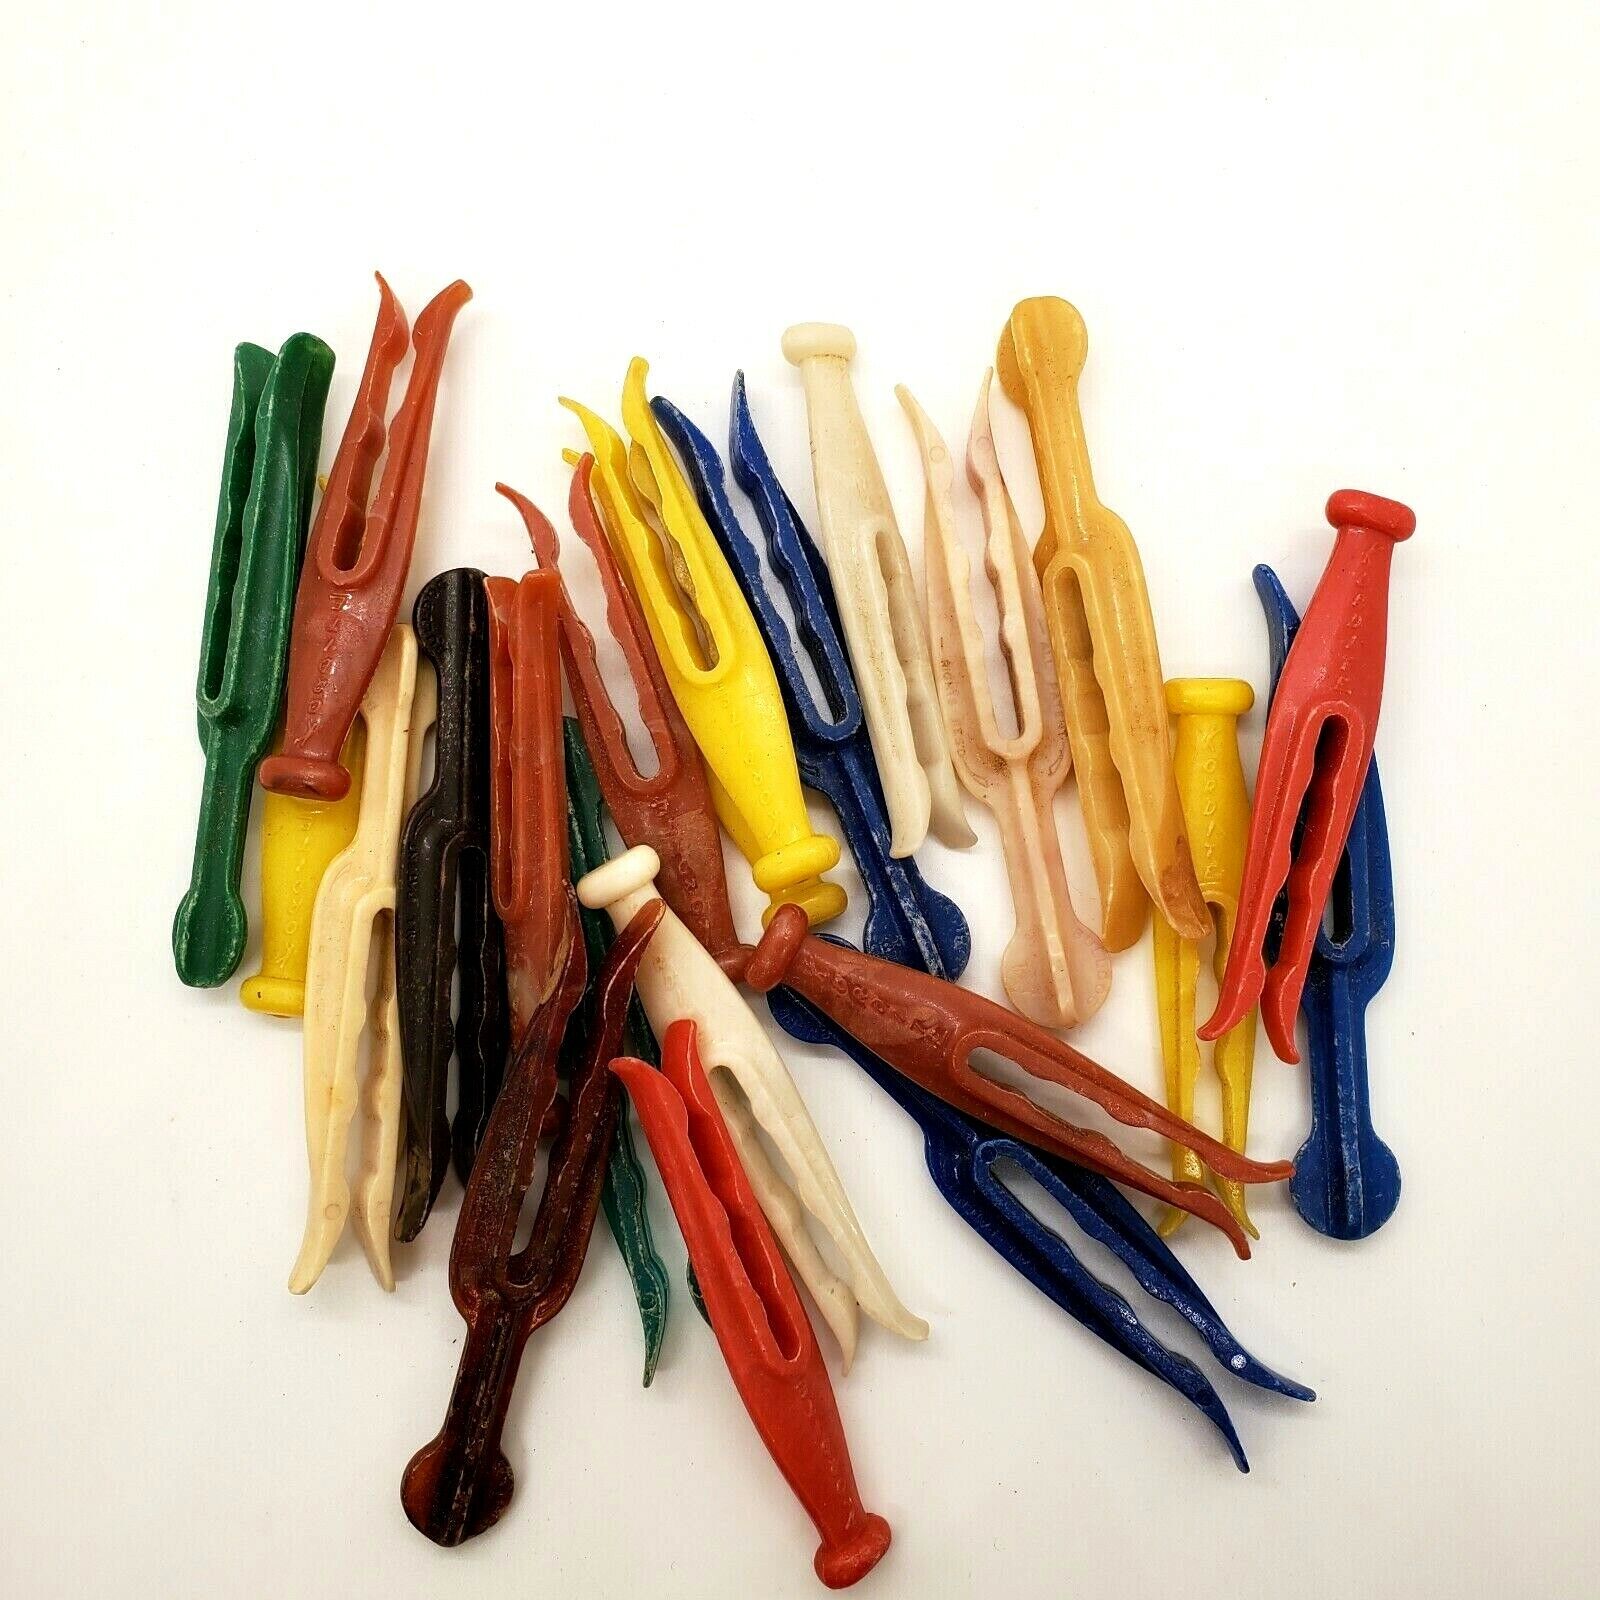 Vintage Plastic Multi-colored Clothes Pins Vintage Clothes Pins Lot Of 22 Pins Без бренда